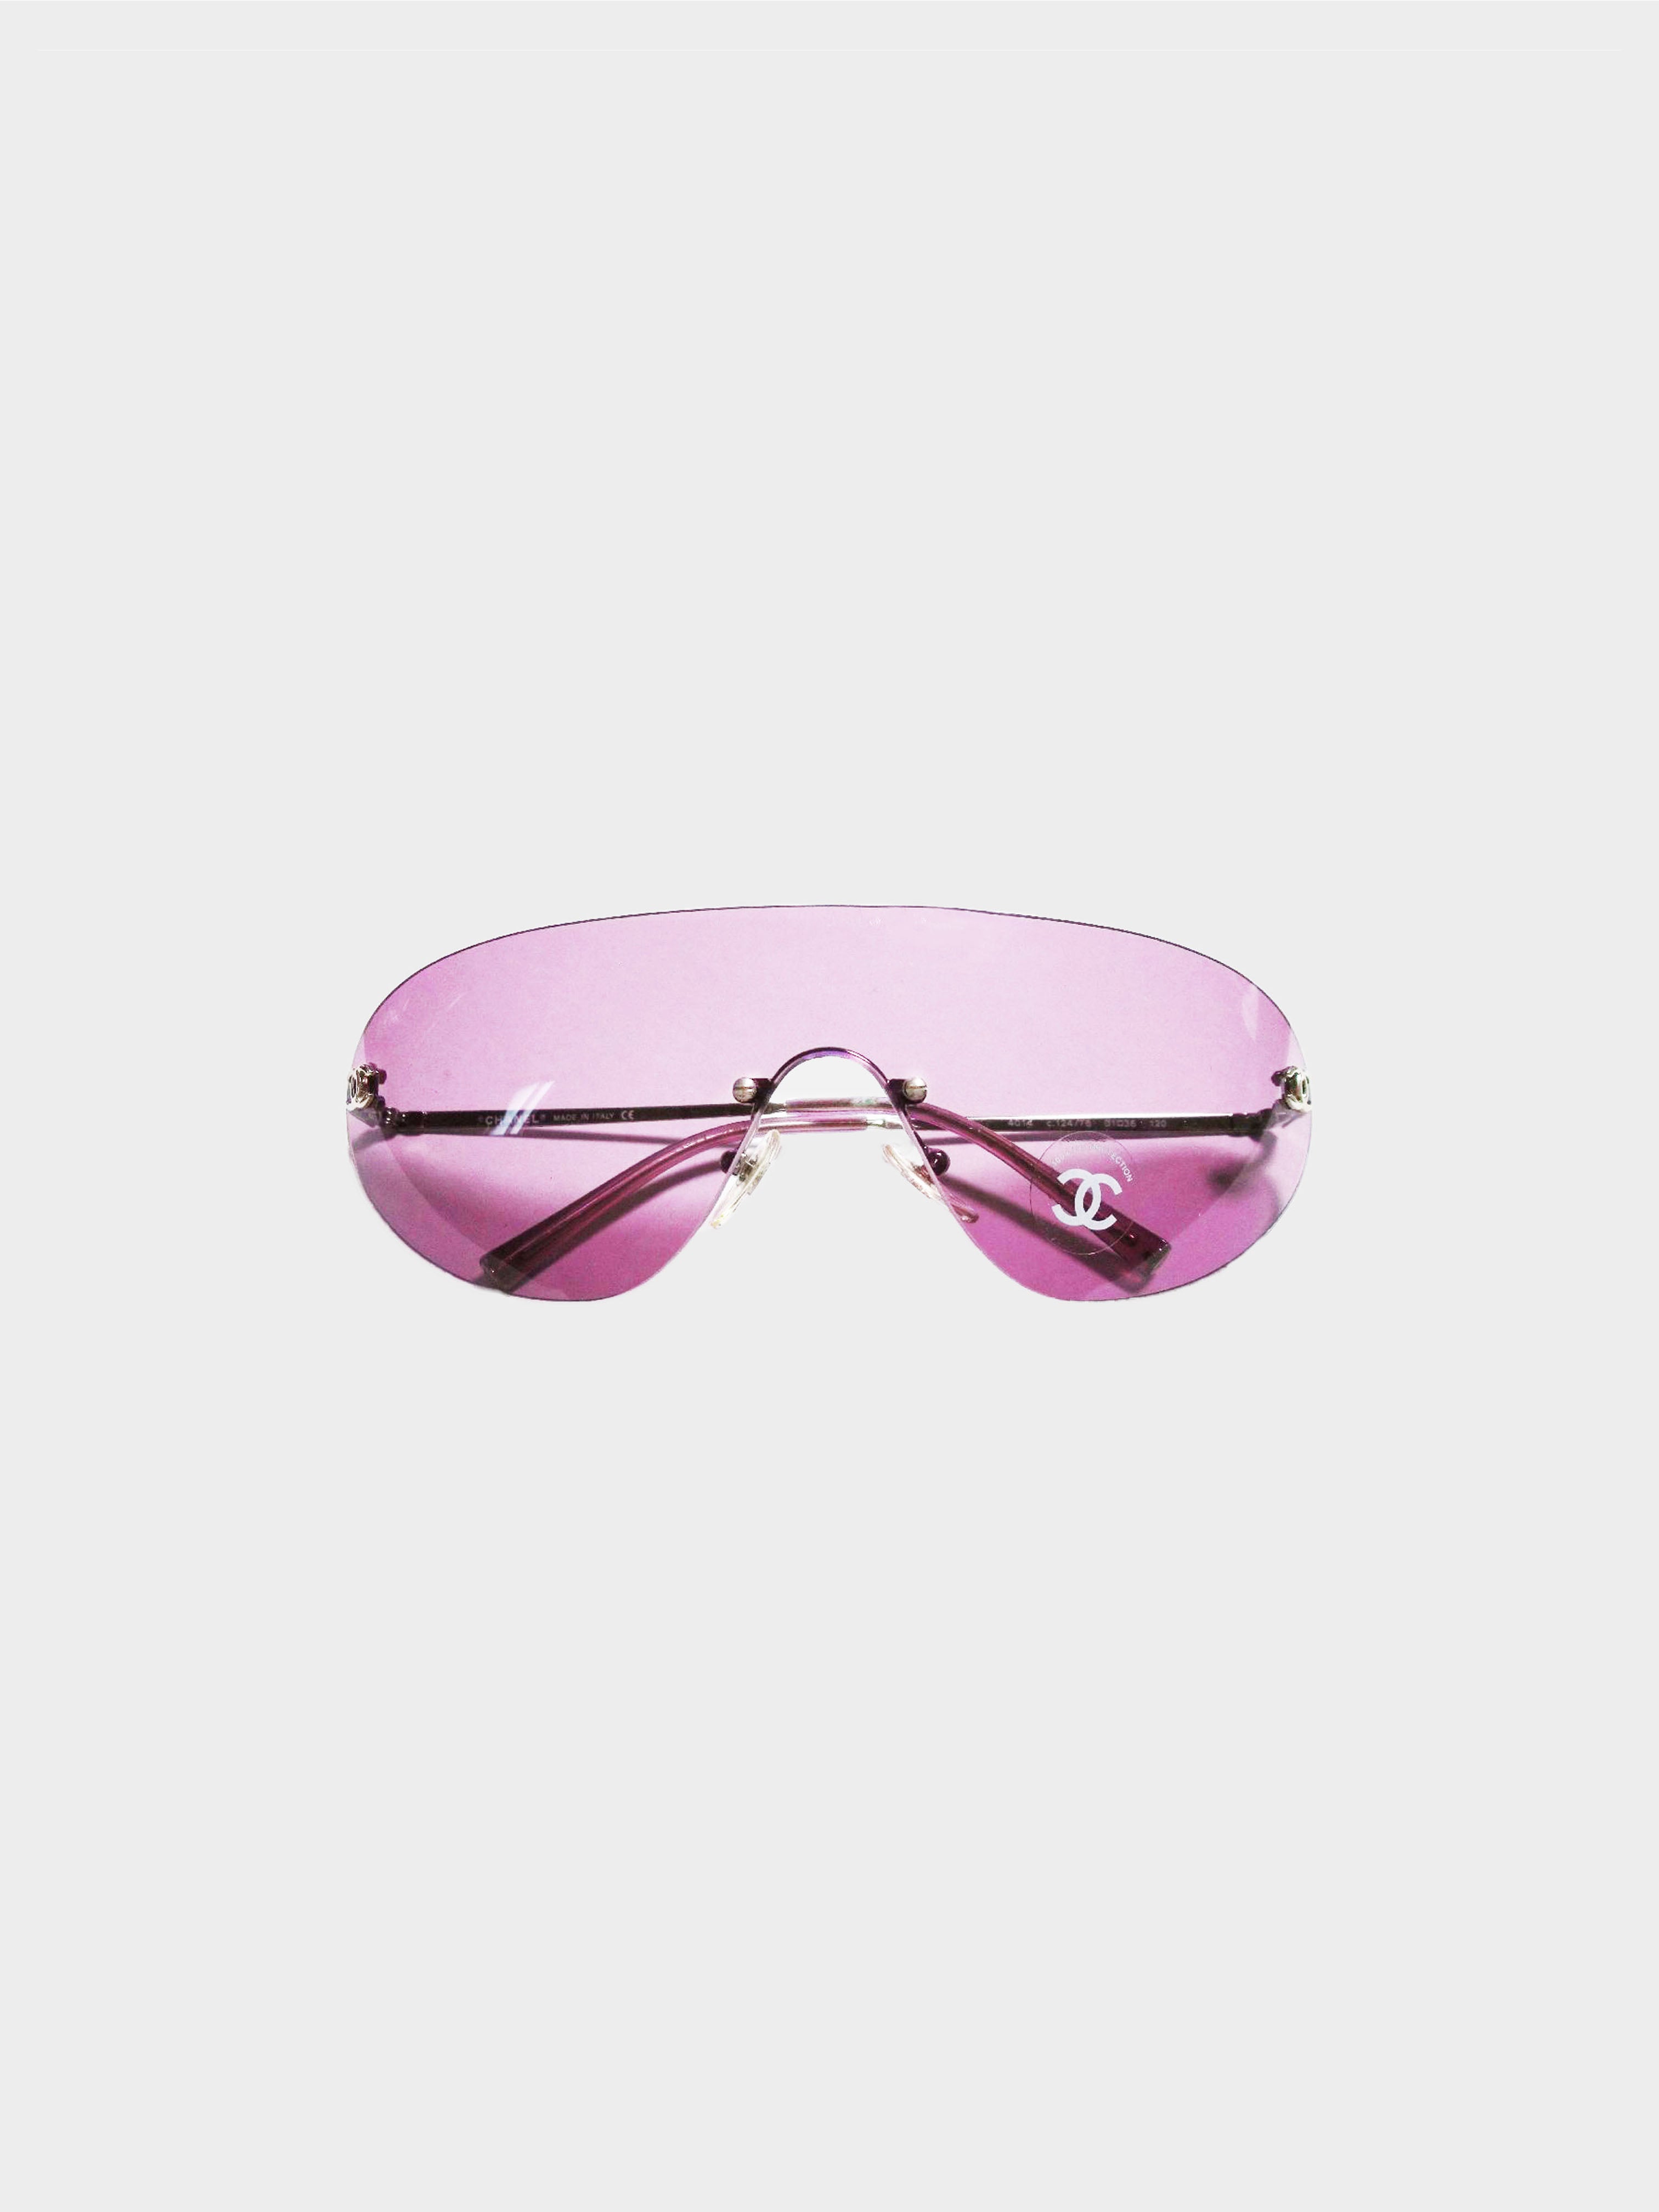 Chanel 2000s Pink Monolens Rimless Sunglasses · INTO